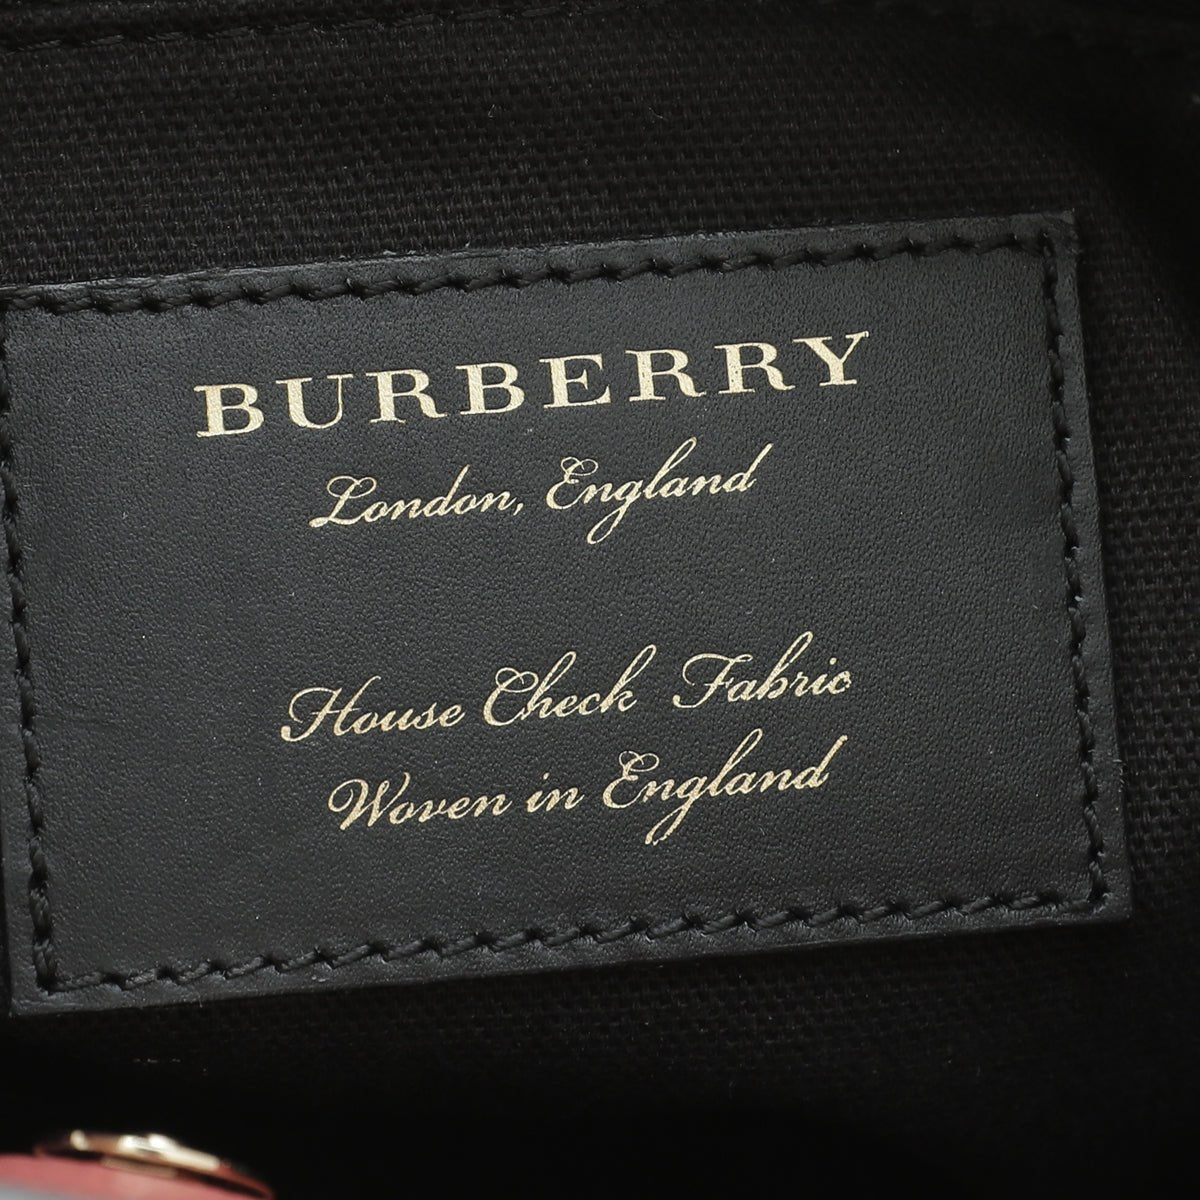 Burberry - Burberry Old Rose Banner Small Tote Bag | The Closet